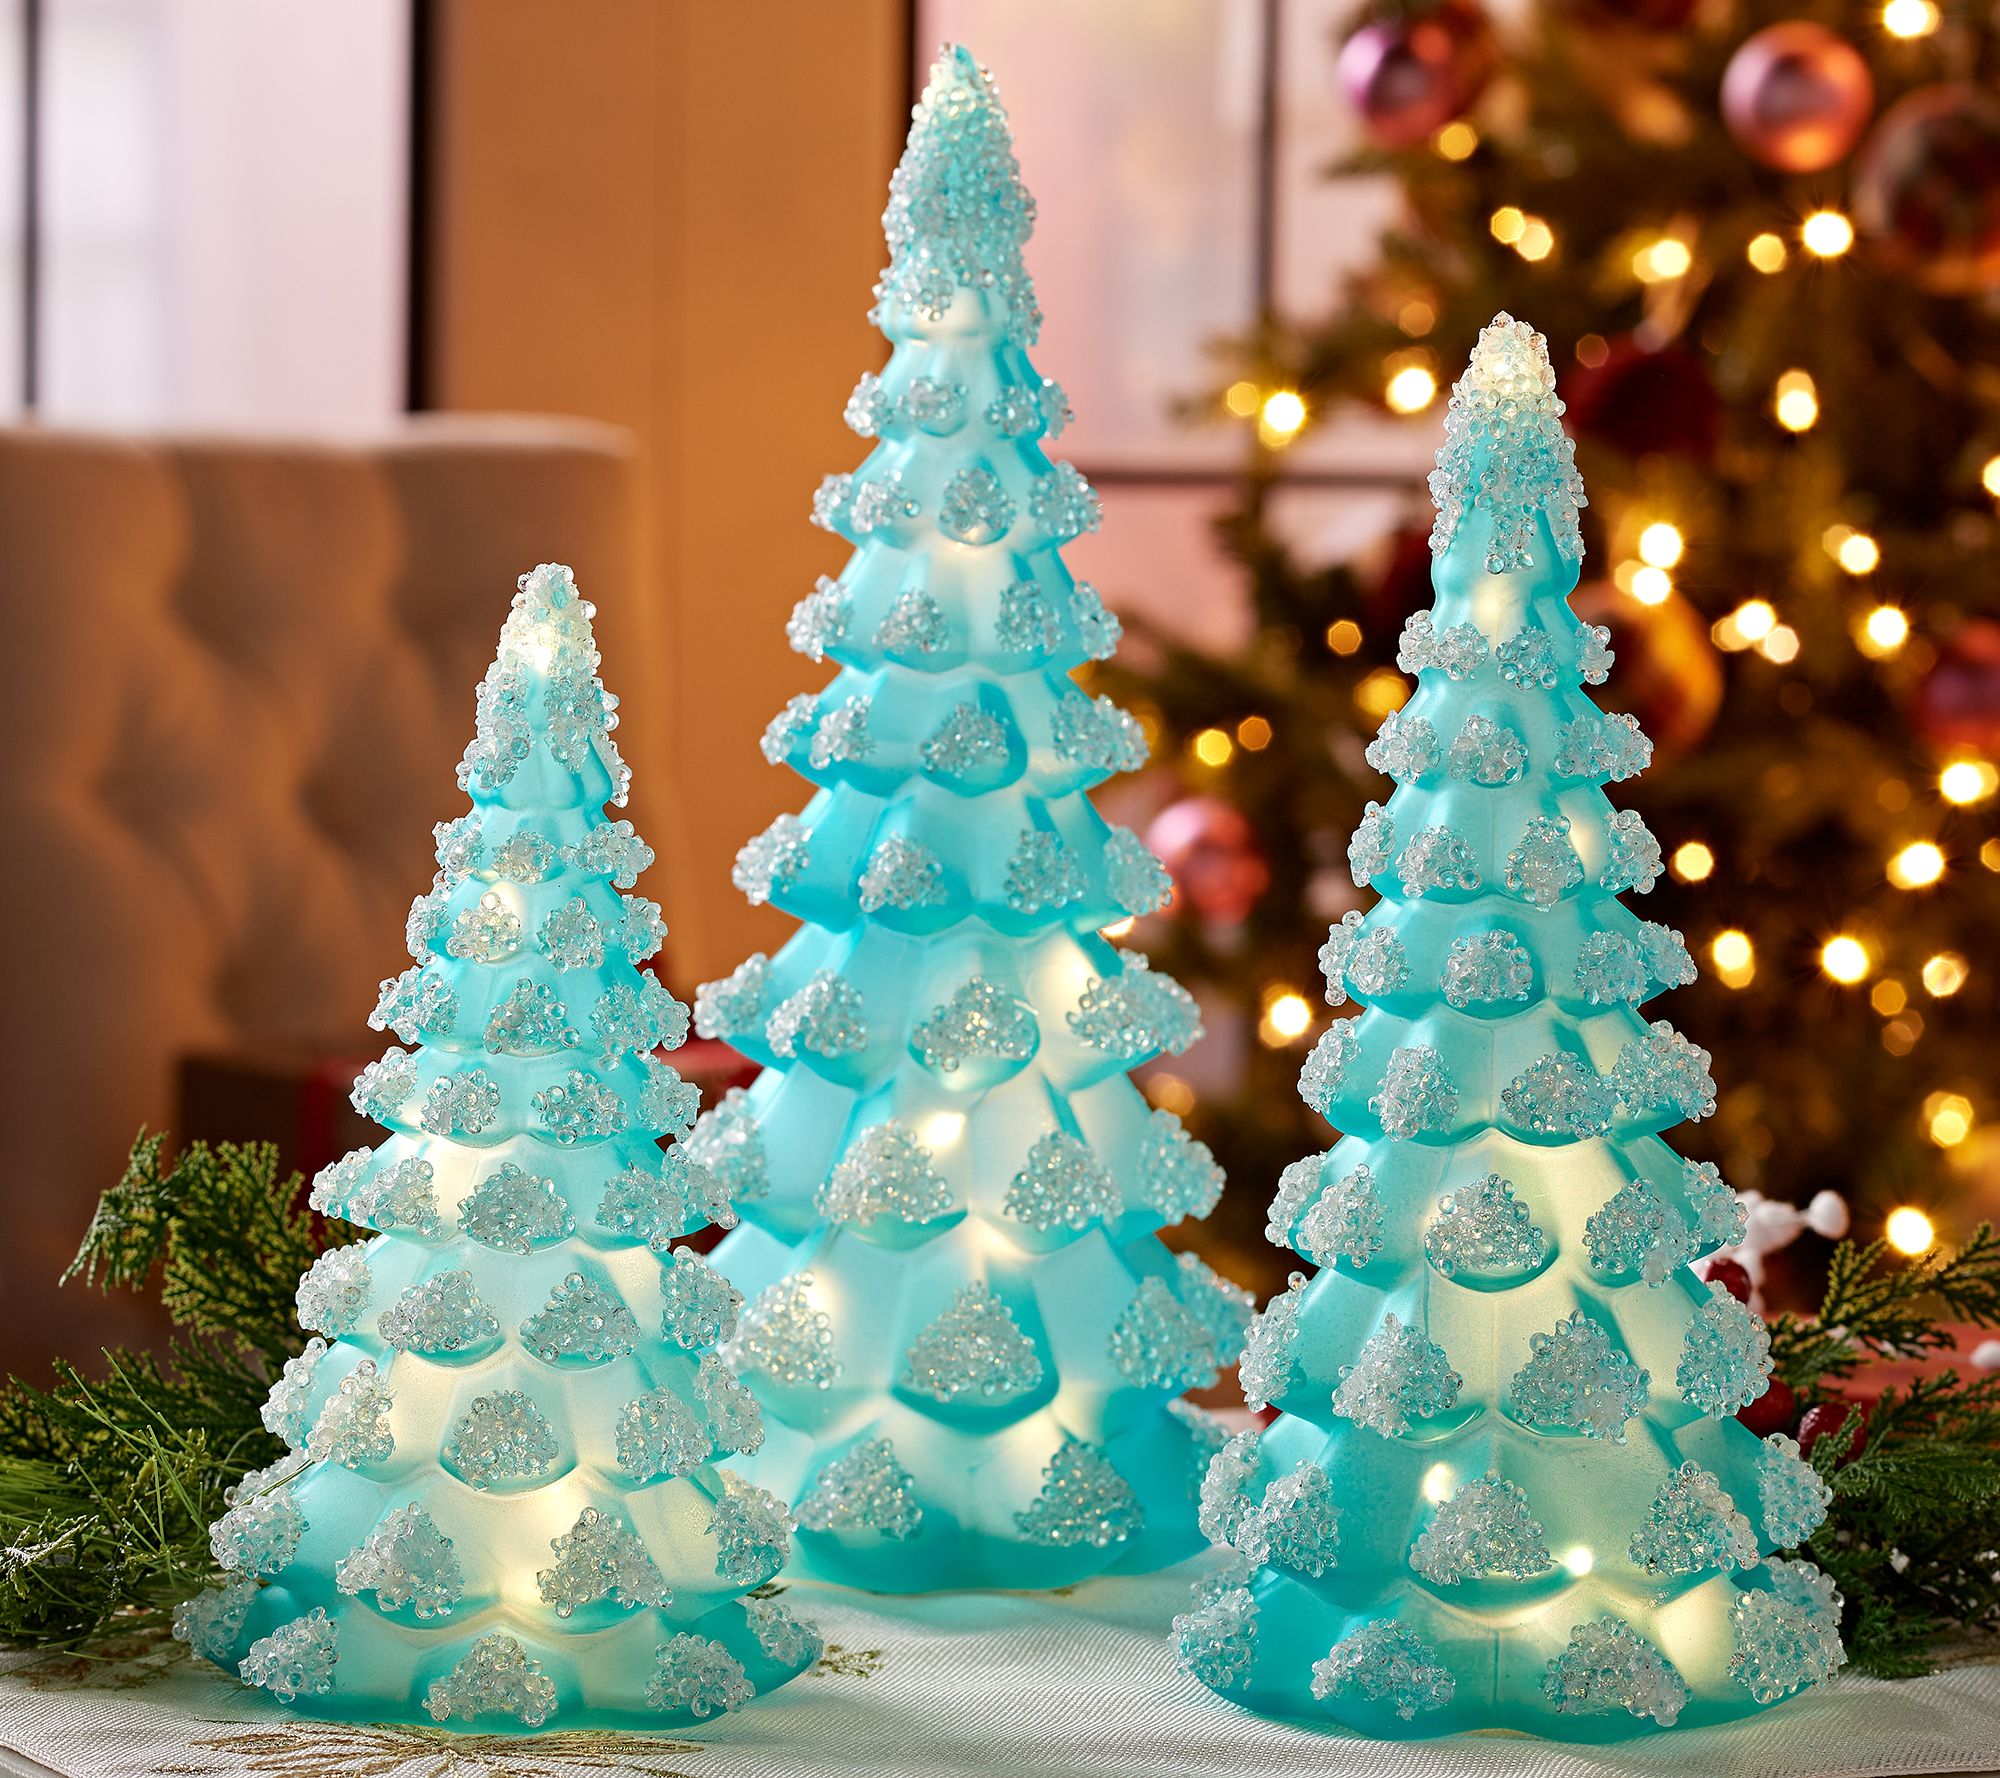 Ceramic Christmas Tree Small White Blue Birds Golden Shimmer and Icy Snow 